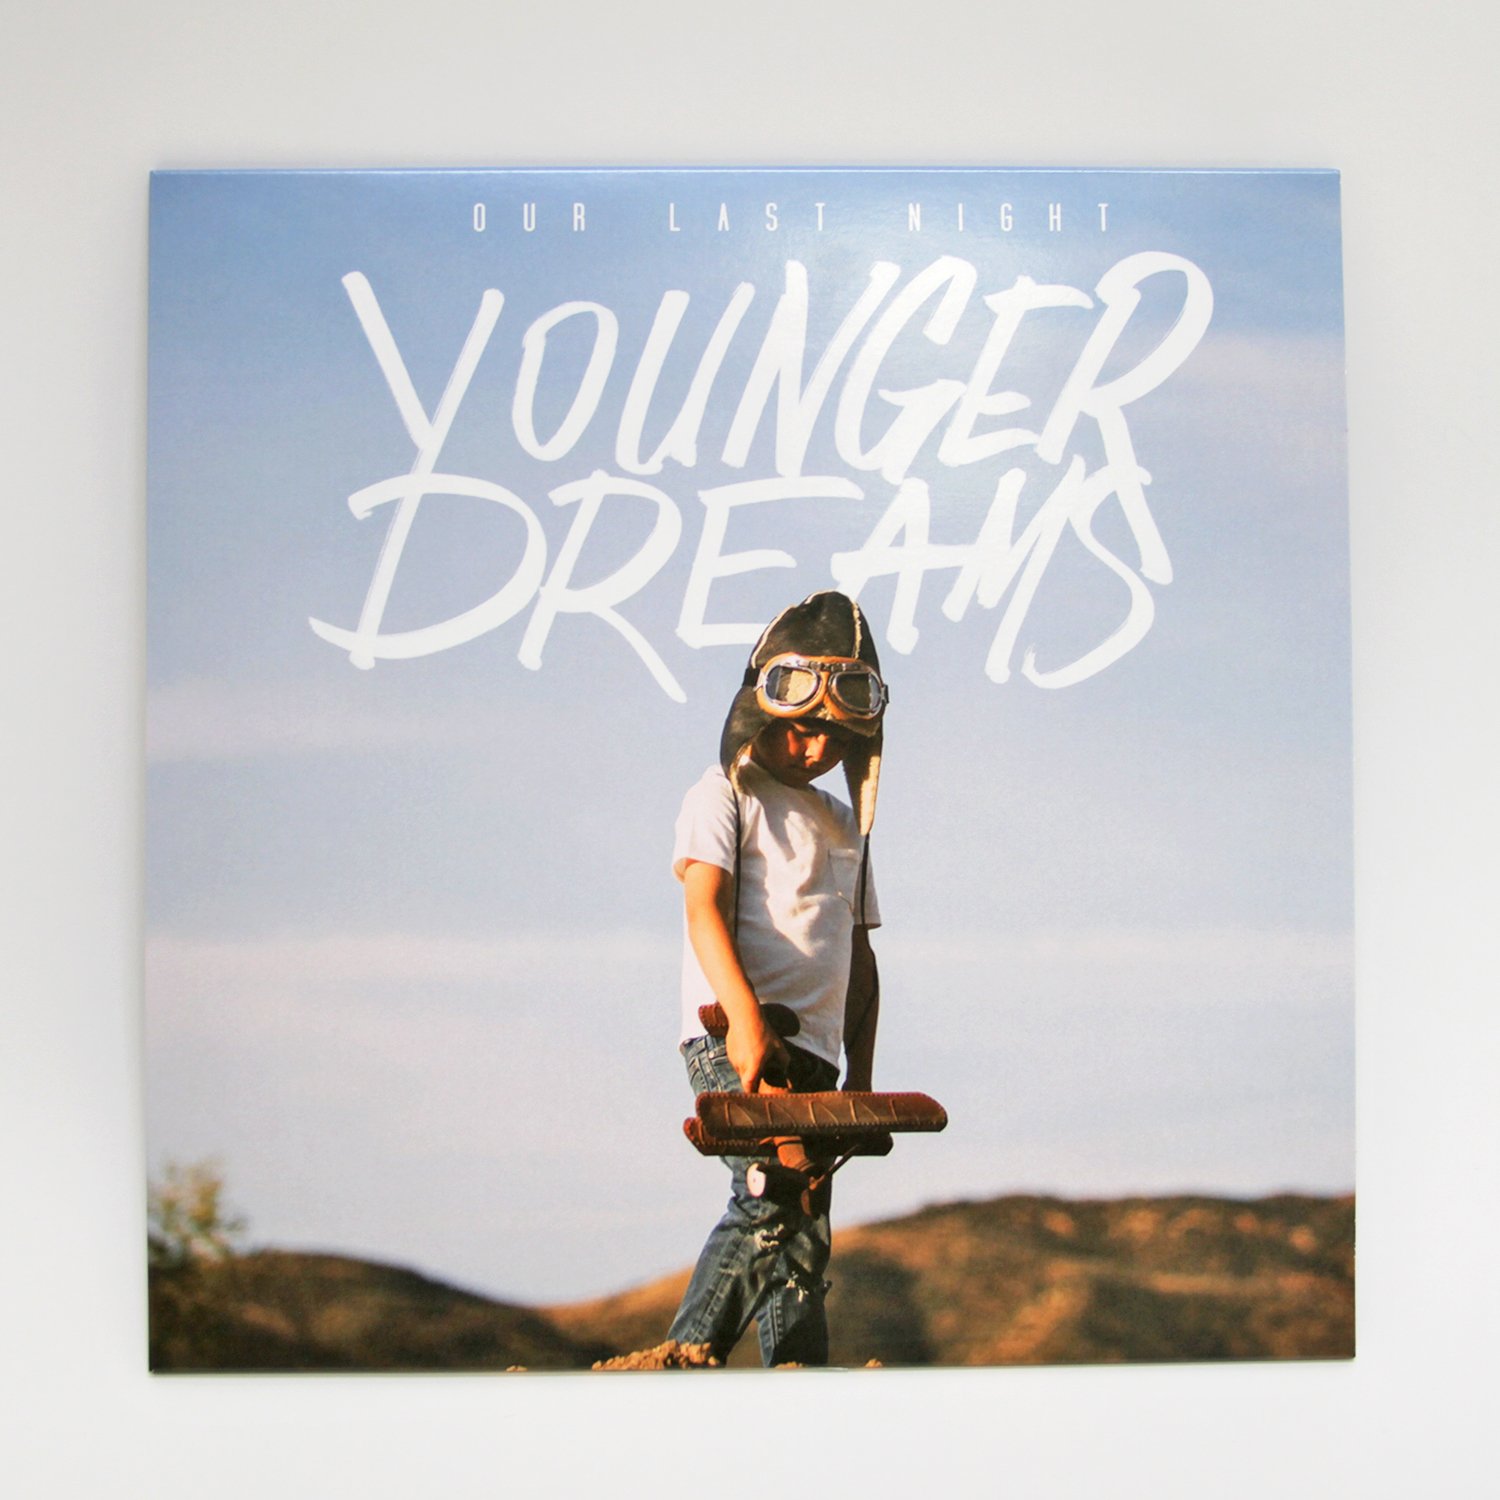 Image of Younger Dreams Vinyl